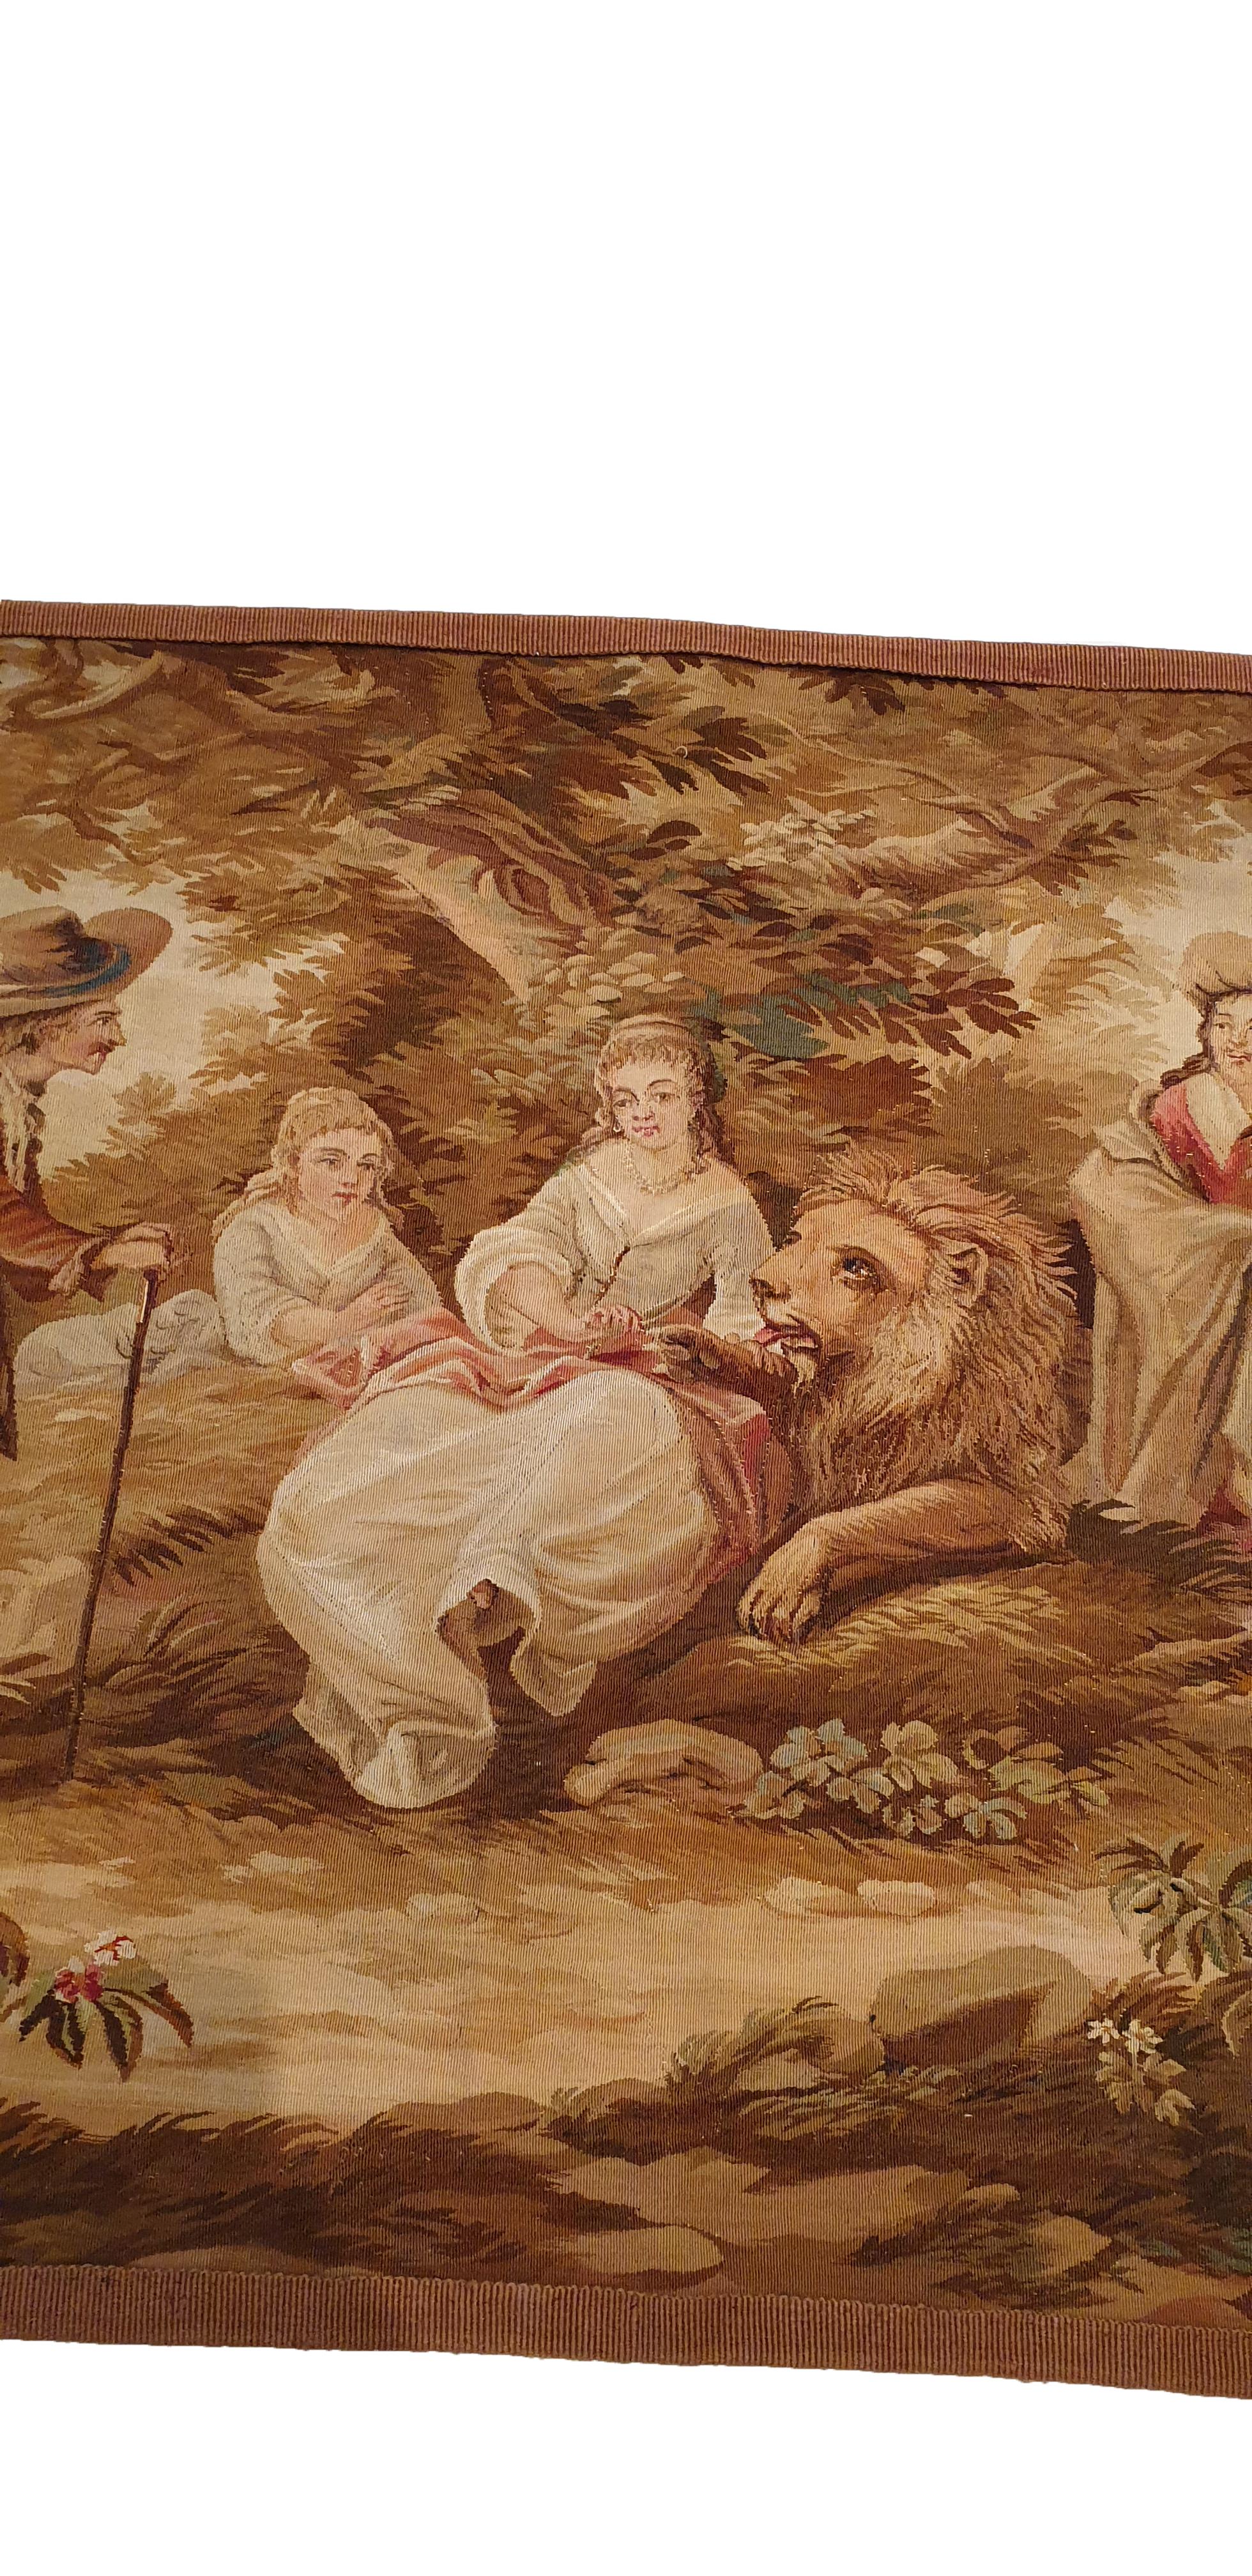  Tapestry Brussels, 19th Century - N° 704 For Sale 4